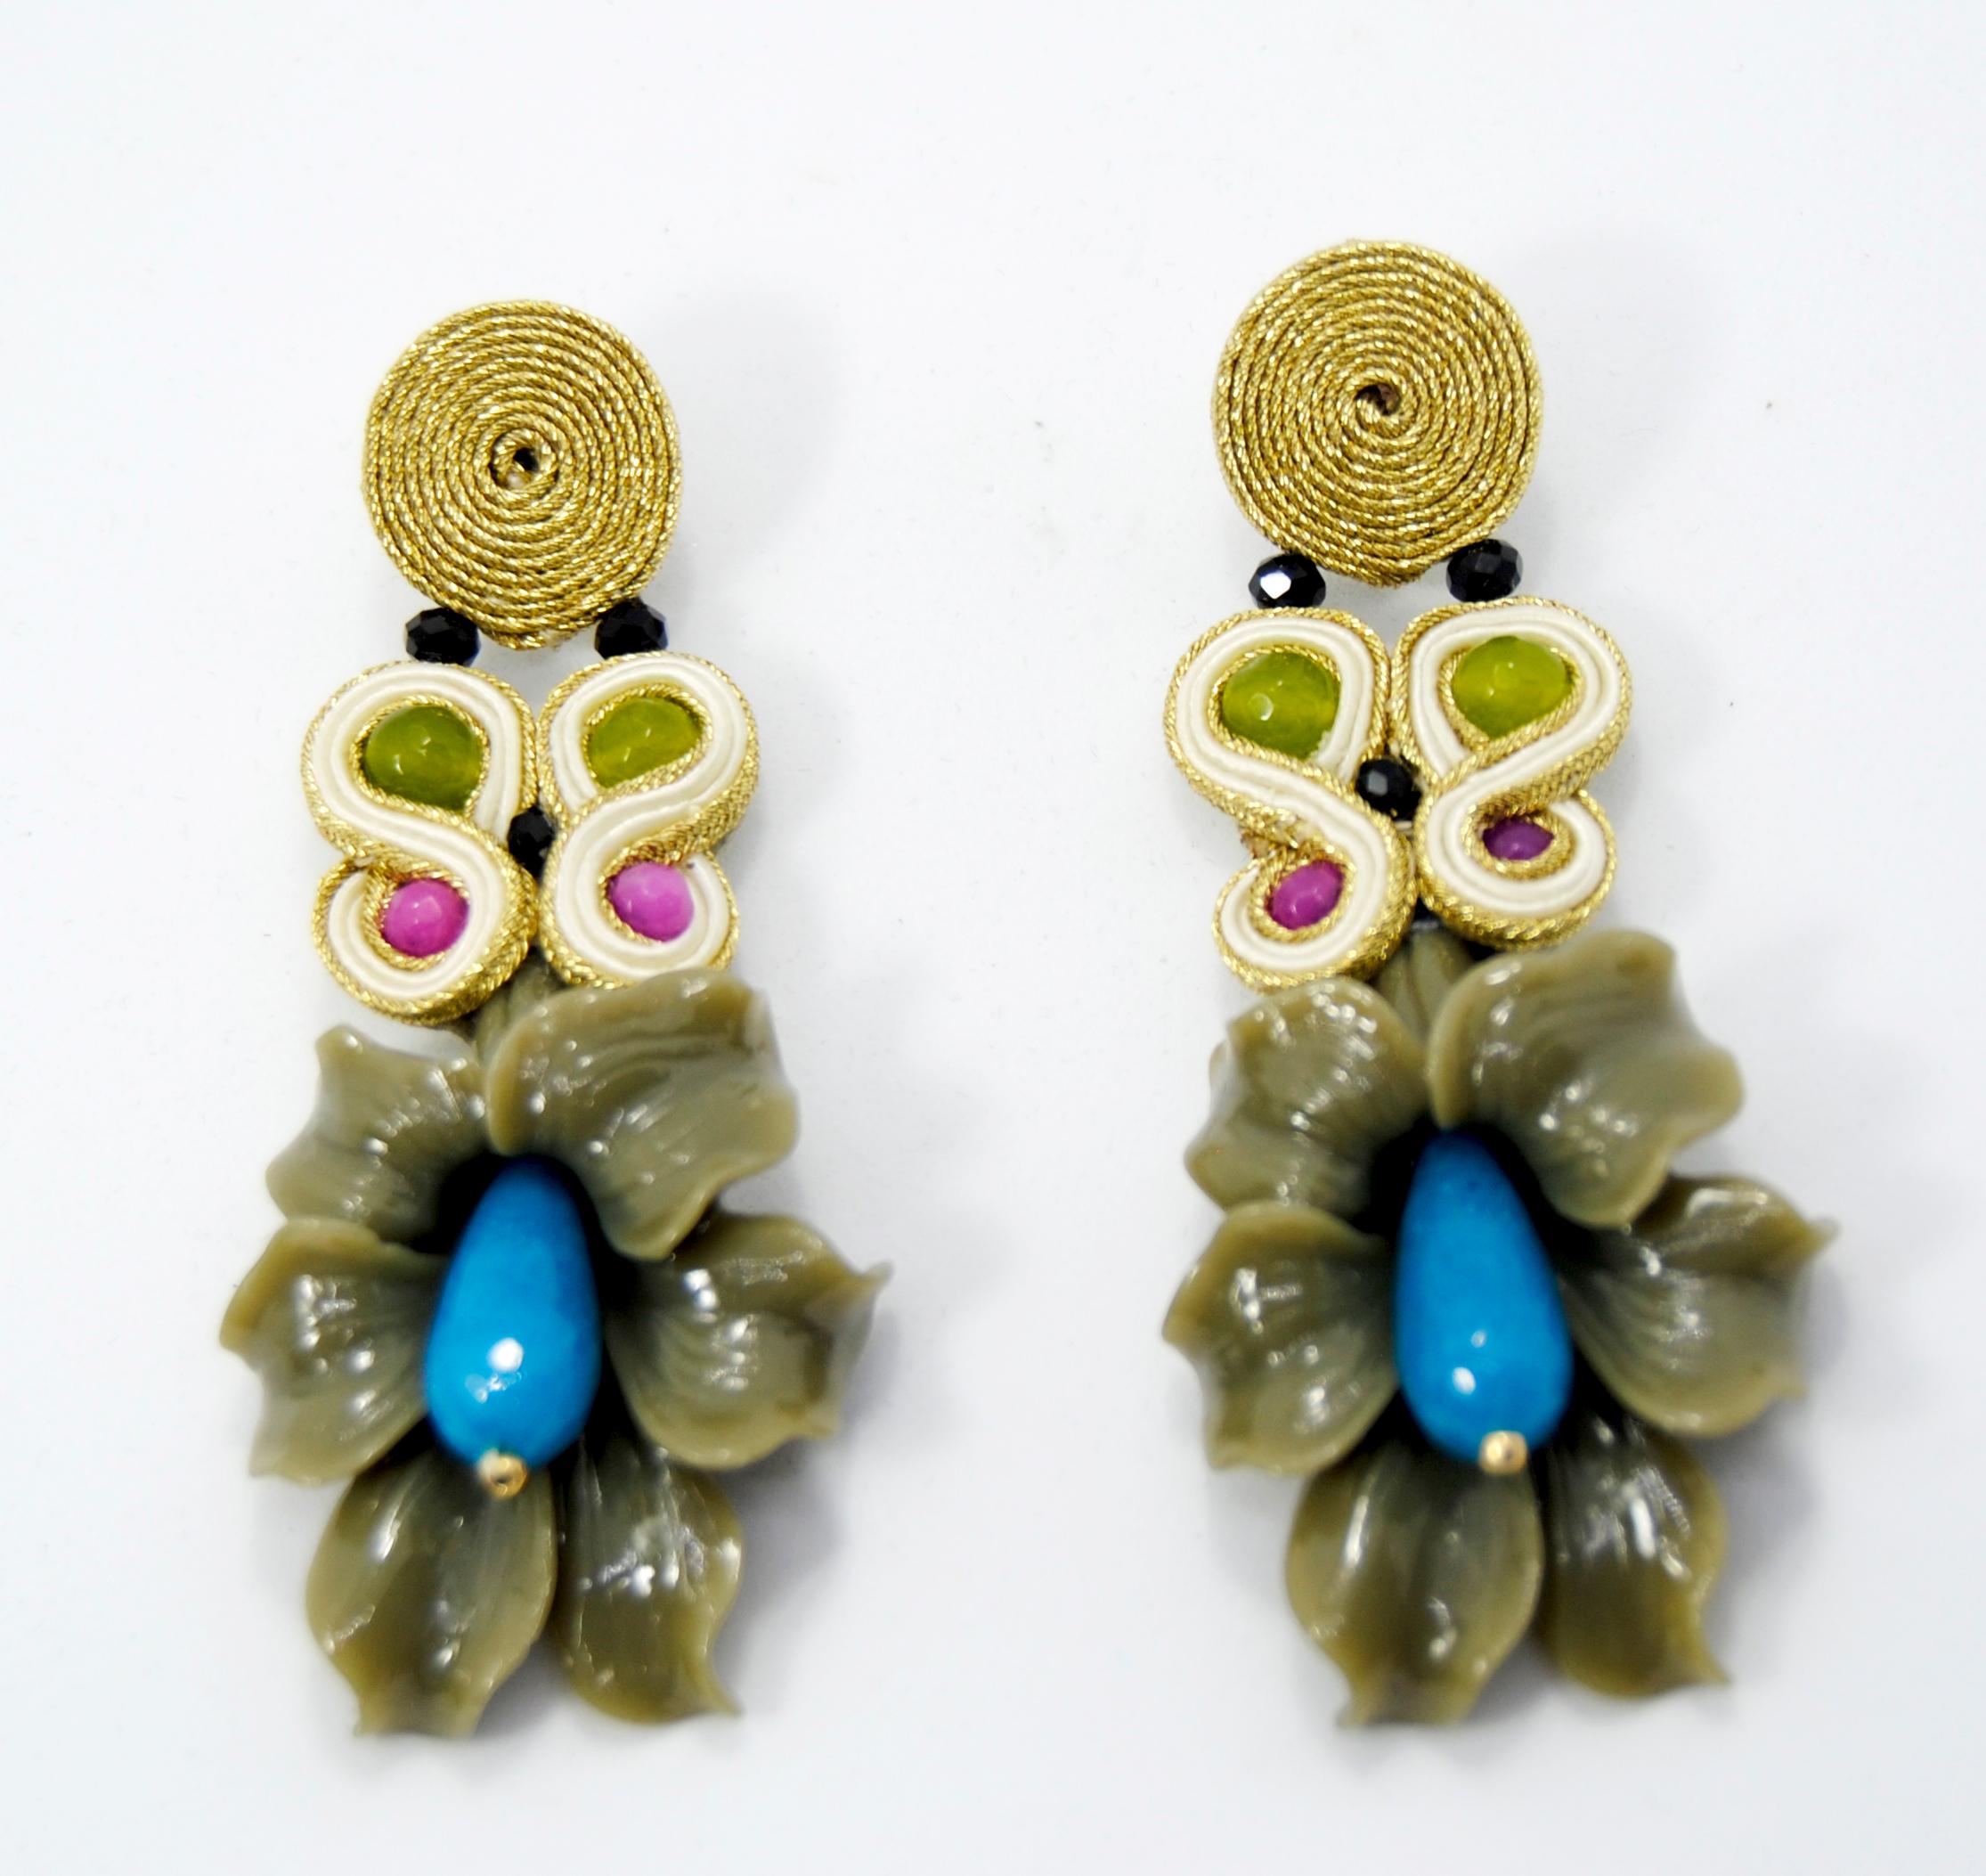 Soutache Technique earrings a Joint venture of Joyería Pradera and Musula Jewels where they create Colorful, Lively and Light Travel Jewelry that has an Iconic touch and give a modern and stylish look.
Soutache Earrings made with silk thread and